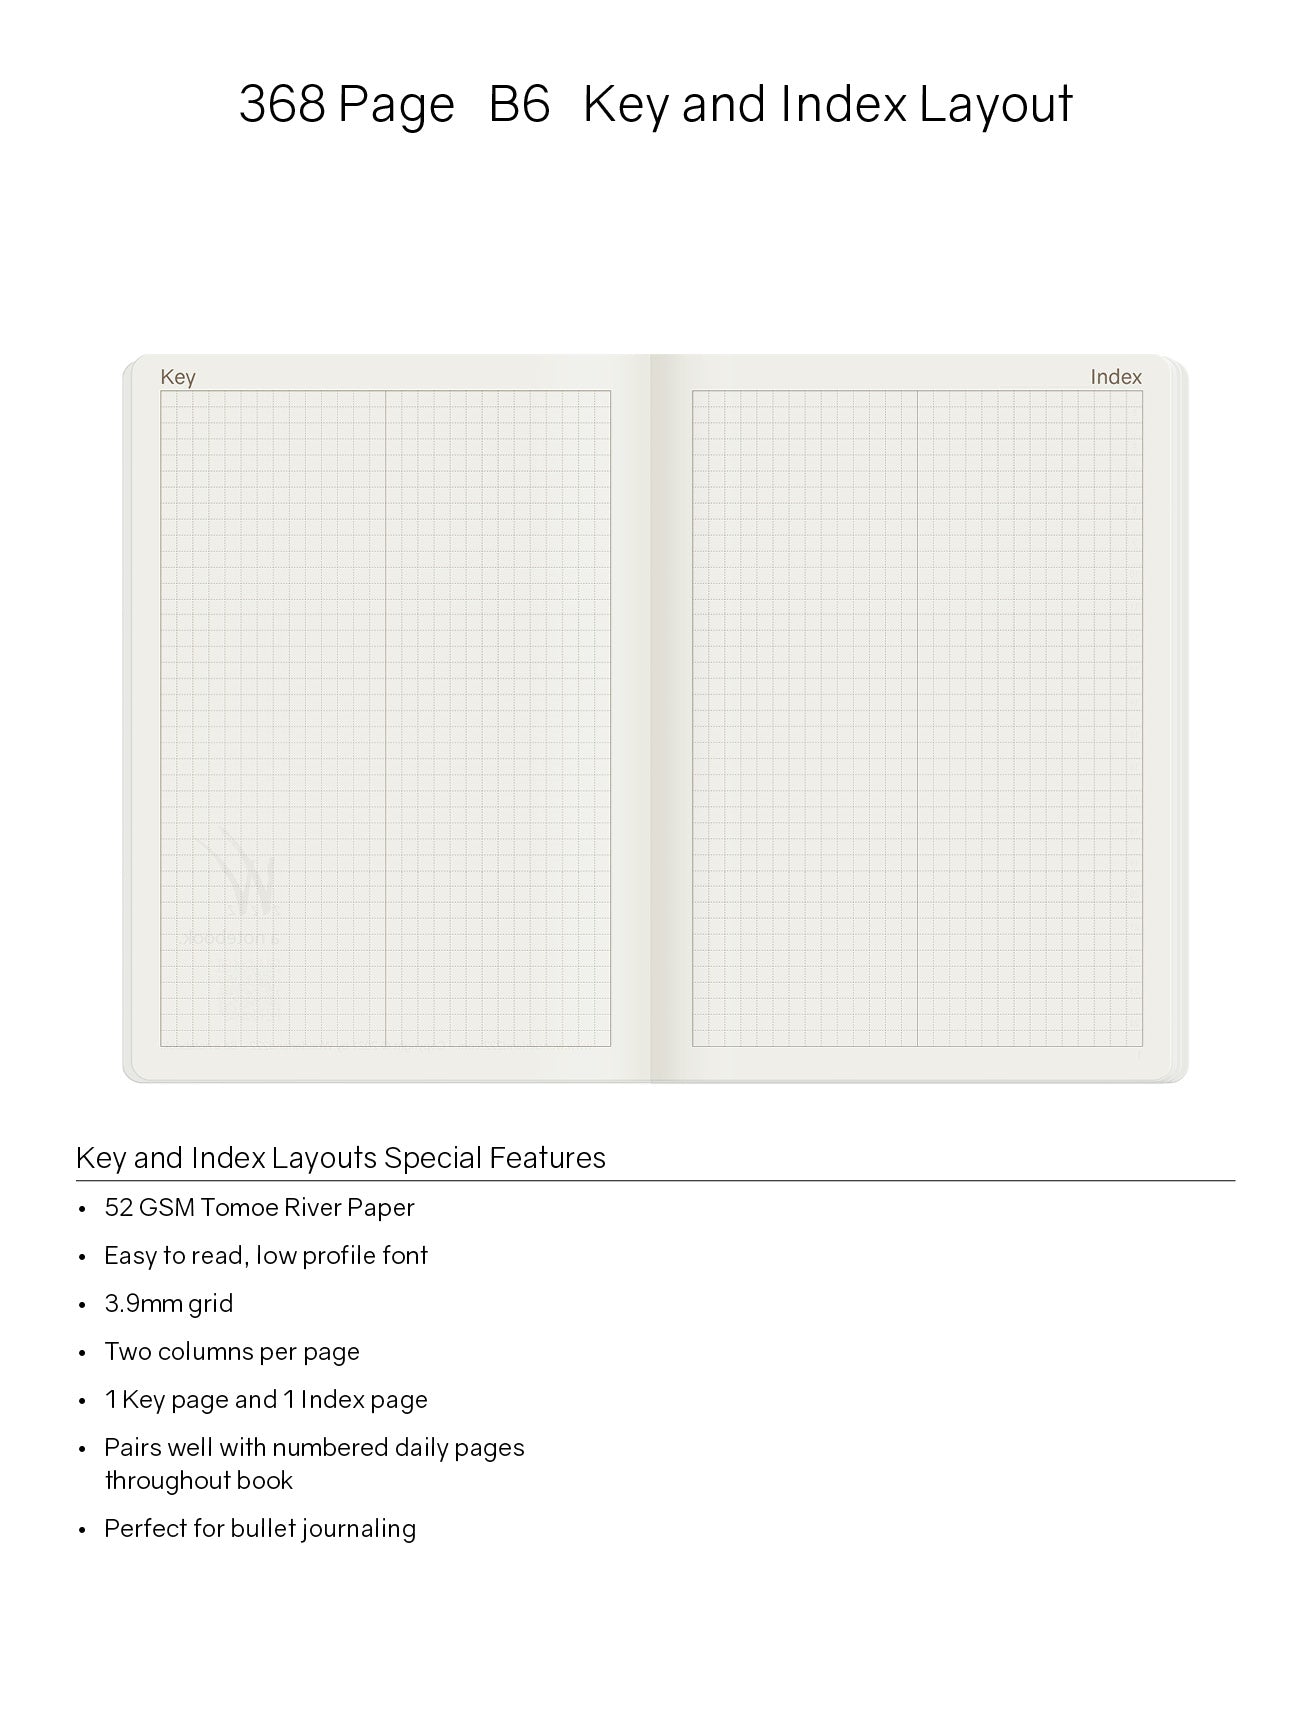 B6 Notebook (368 pages) - 2023 Edition